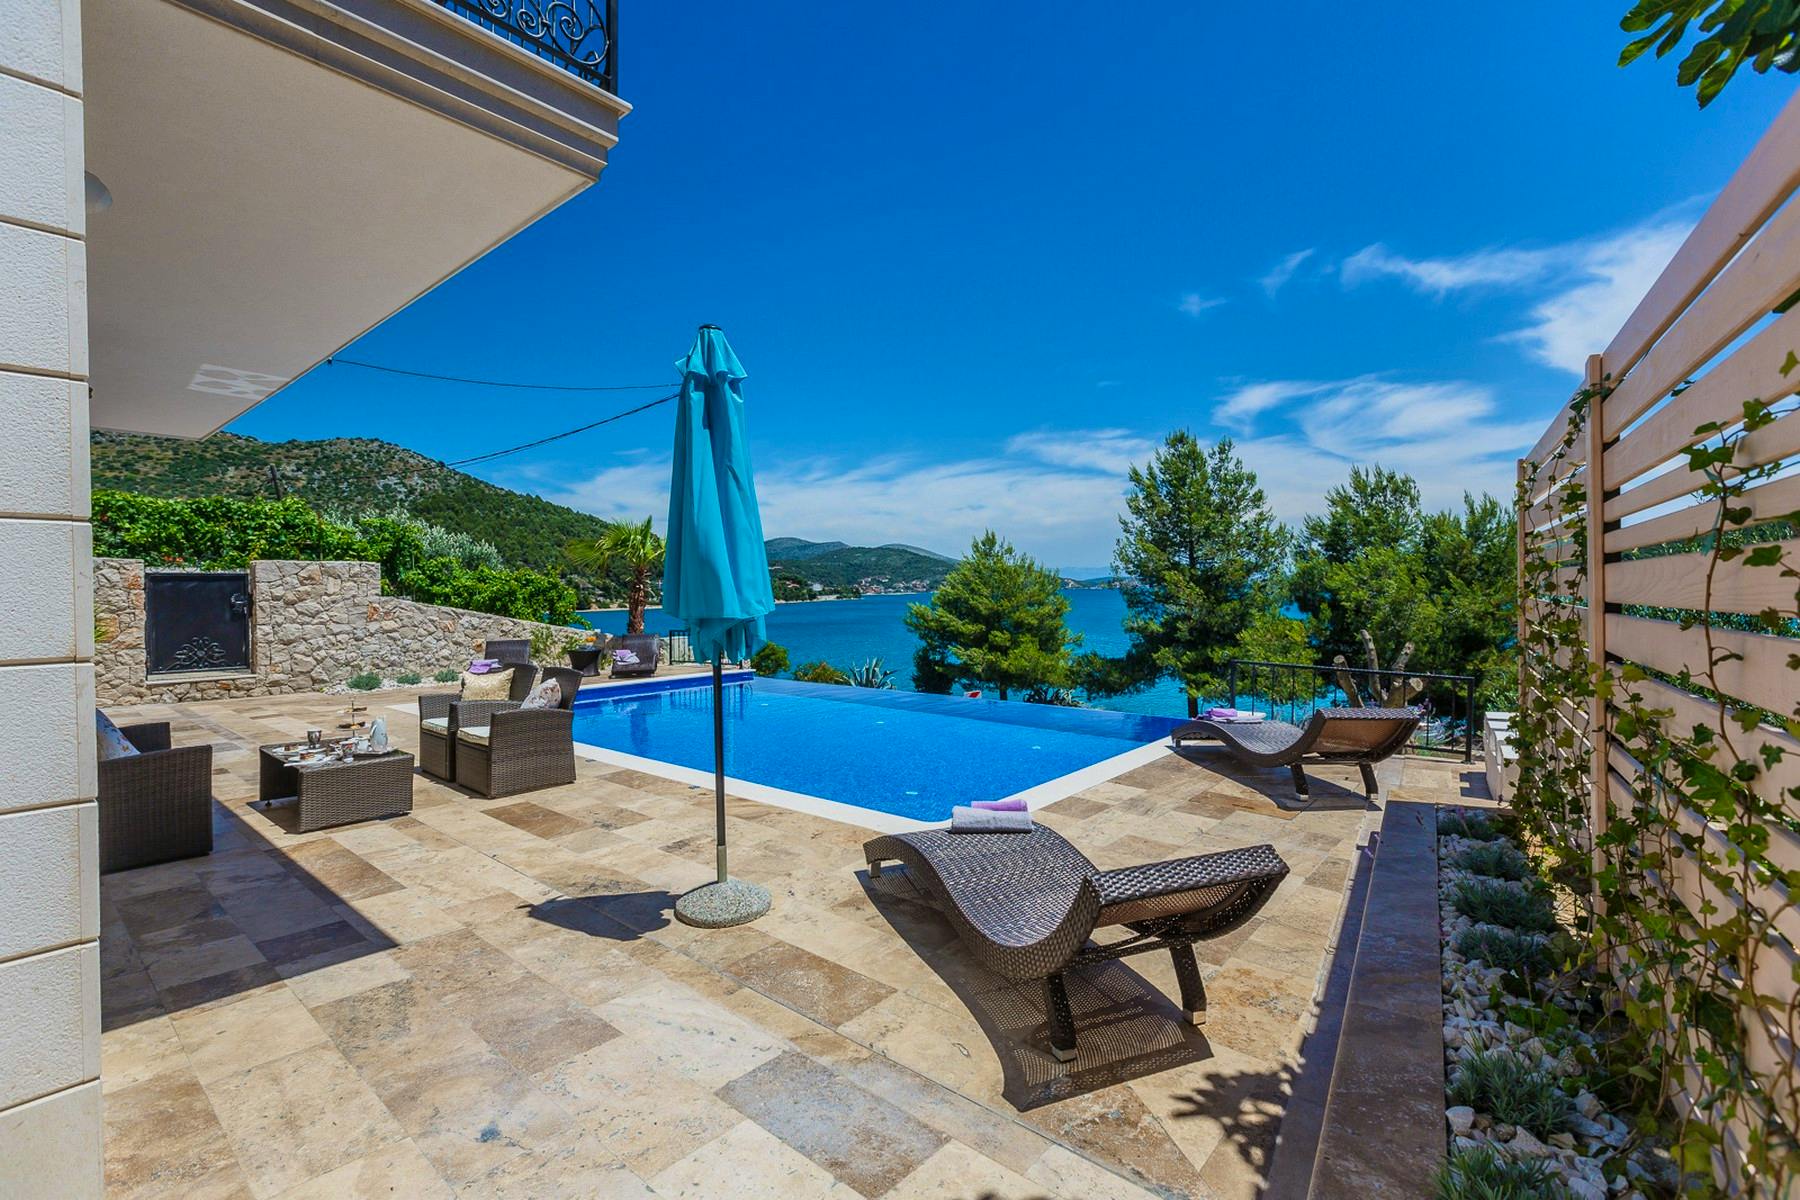 Spacious terrace with pool, sundeck and lounge area